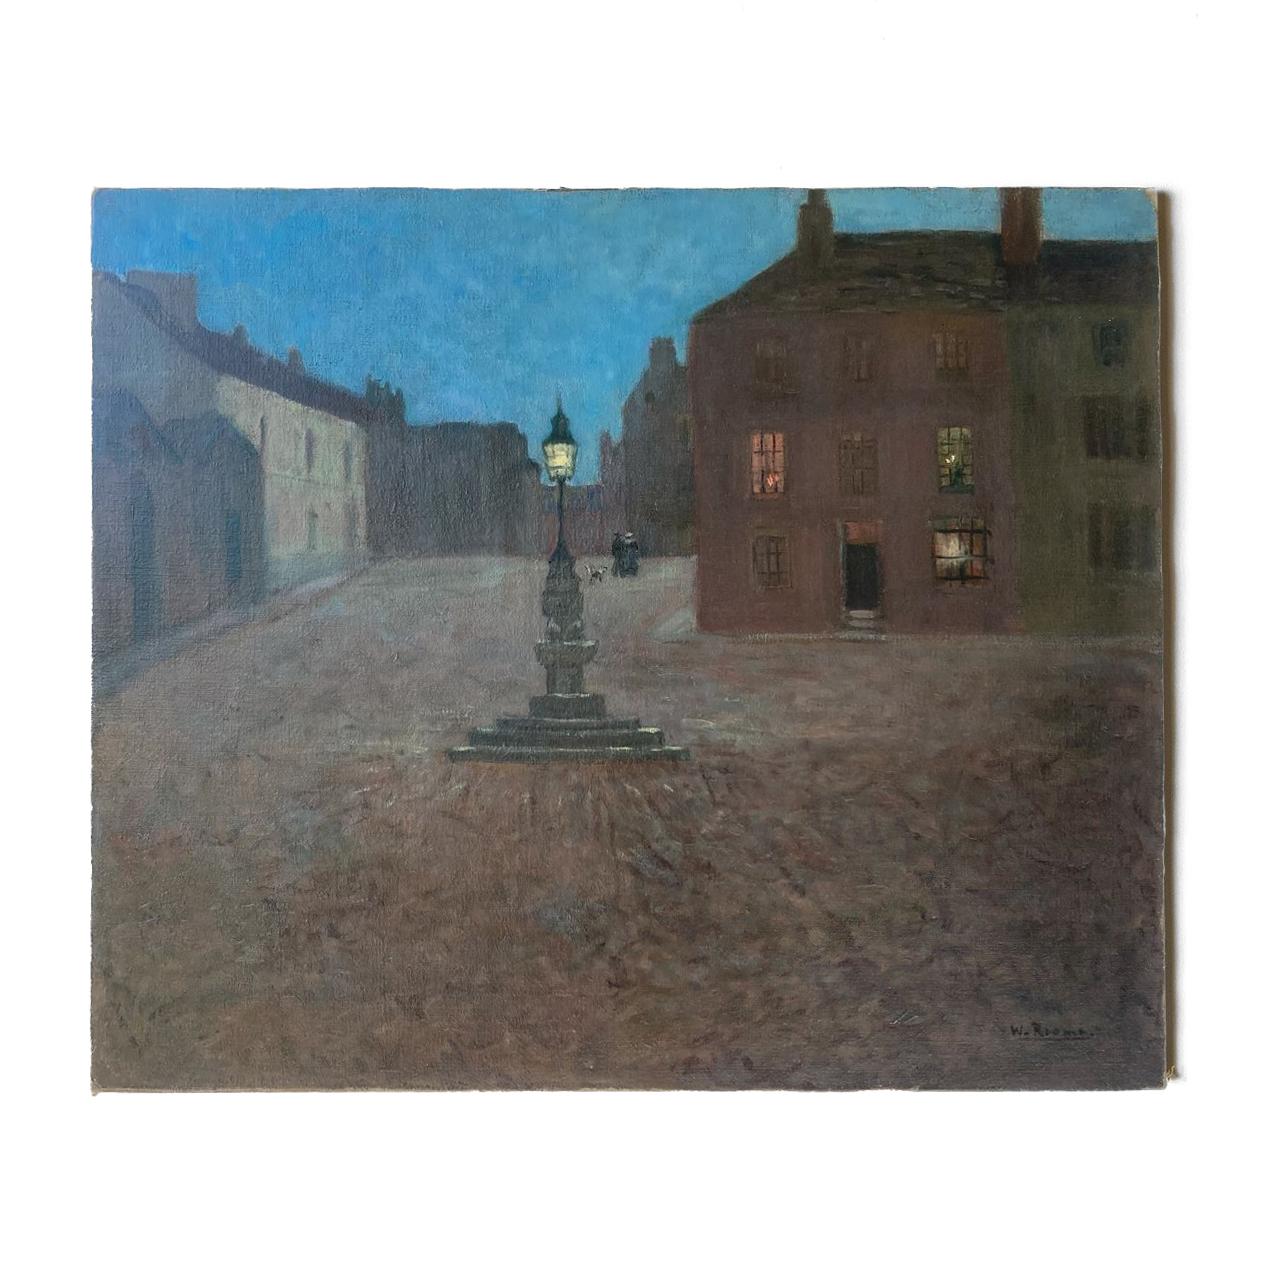 A Dusky Town Square Landscape Painting, Early 20th century

by Winifred Beatrice Roome 1873-1957

Depicting figures walking with a dog in the distance in a quiet town square in the late evening, the street lamp is on and the sky is